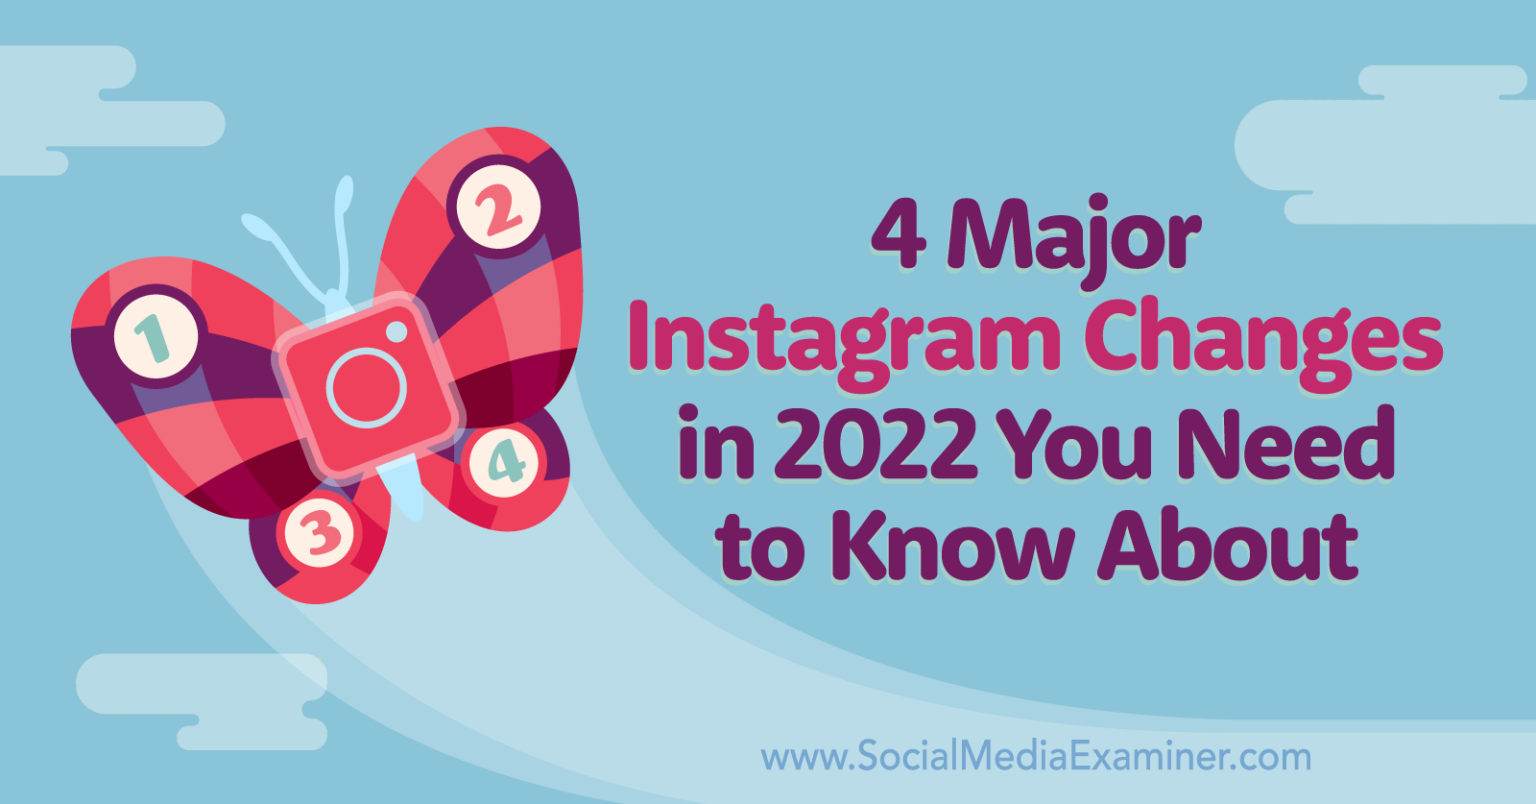 4 Major Instagram Changes in 2022 You Need to Know About Social Media